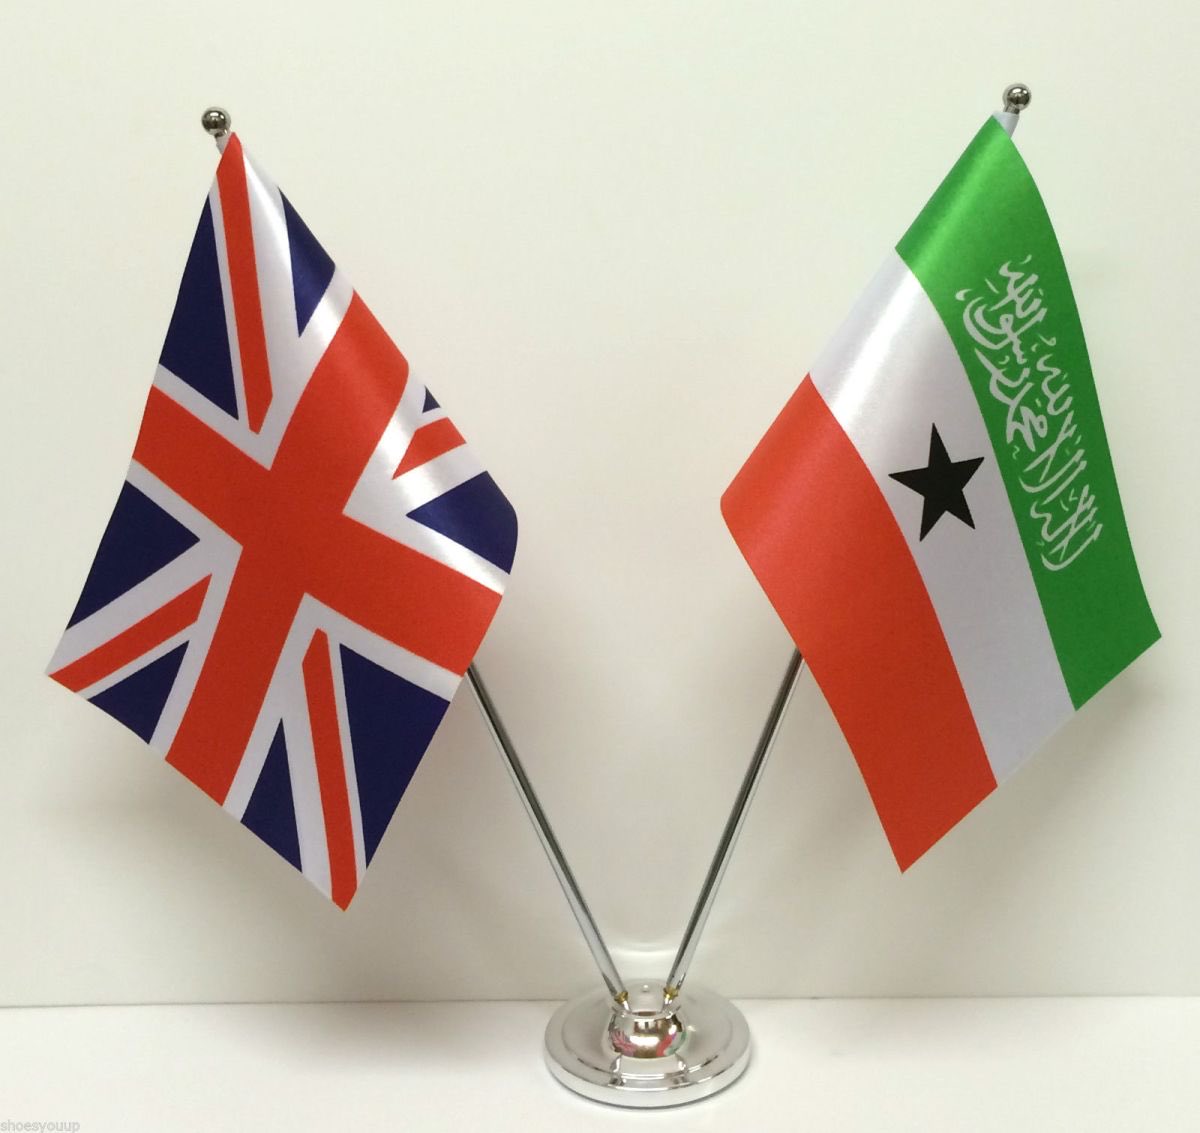 U.K. Somaliland alliance has over the years done incredible work on behalf of Somaliland spending their own resources and time. They do not receive any funding from the Somaliland State at all. I can confidently say they have elevated the Somaliland cause to new levels. At…